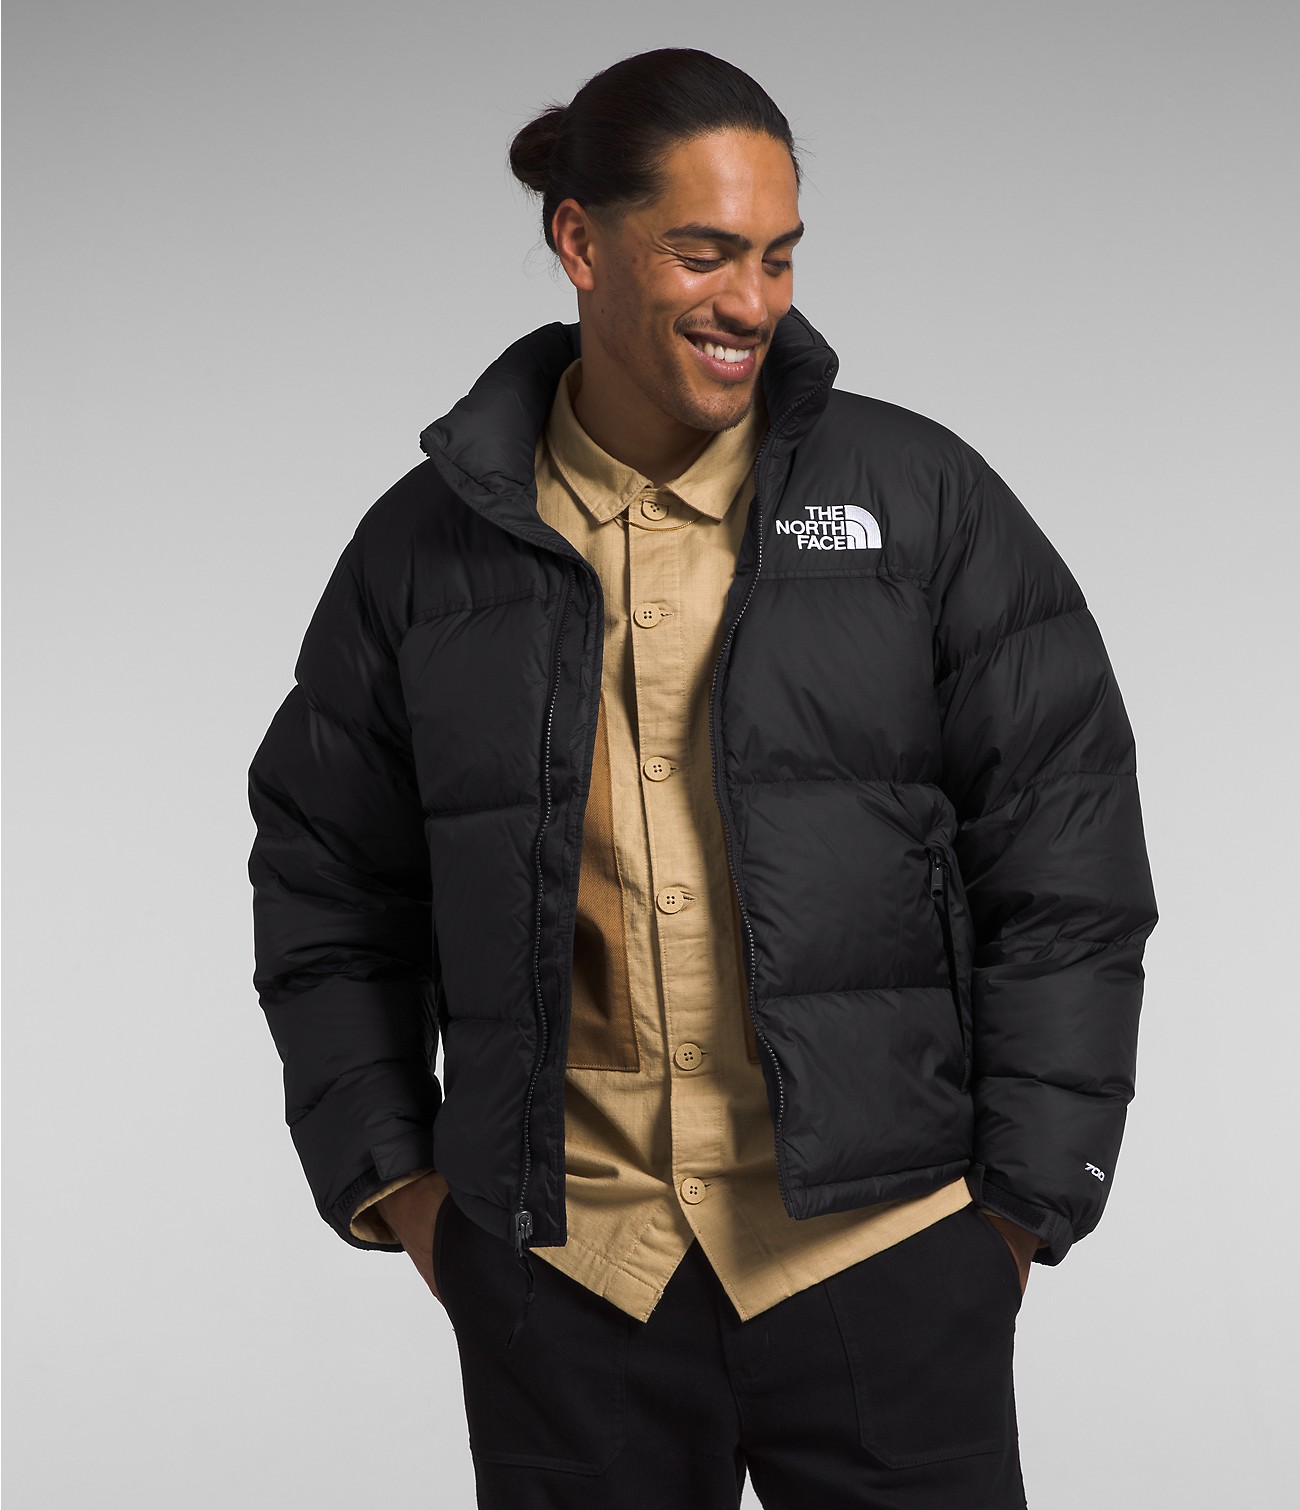 Unlock Wilderness' choice in the Hawke and Co Vs North Face comparison, the 1996 Retro Nuptse Jacket by The North Face